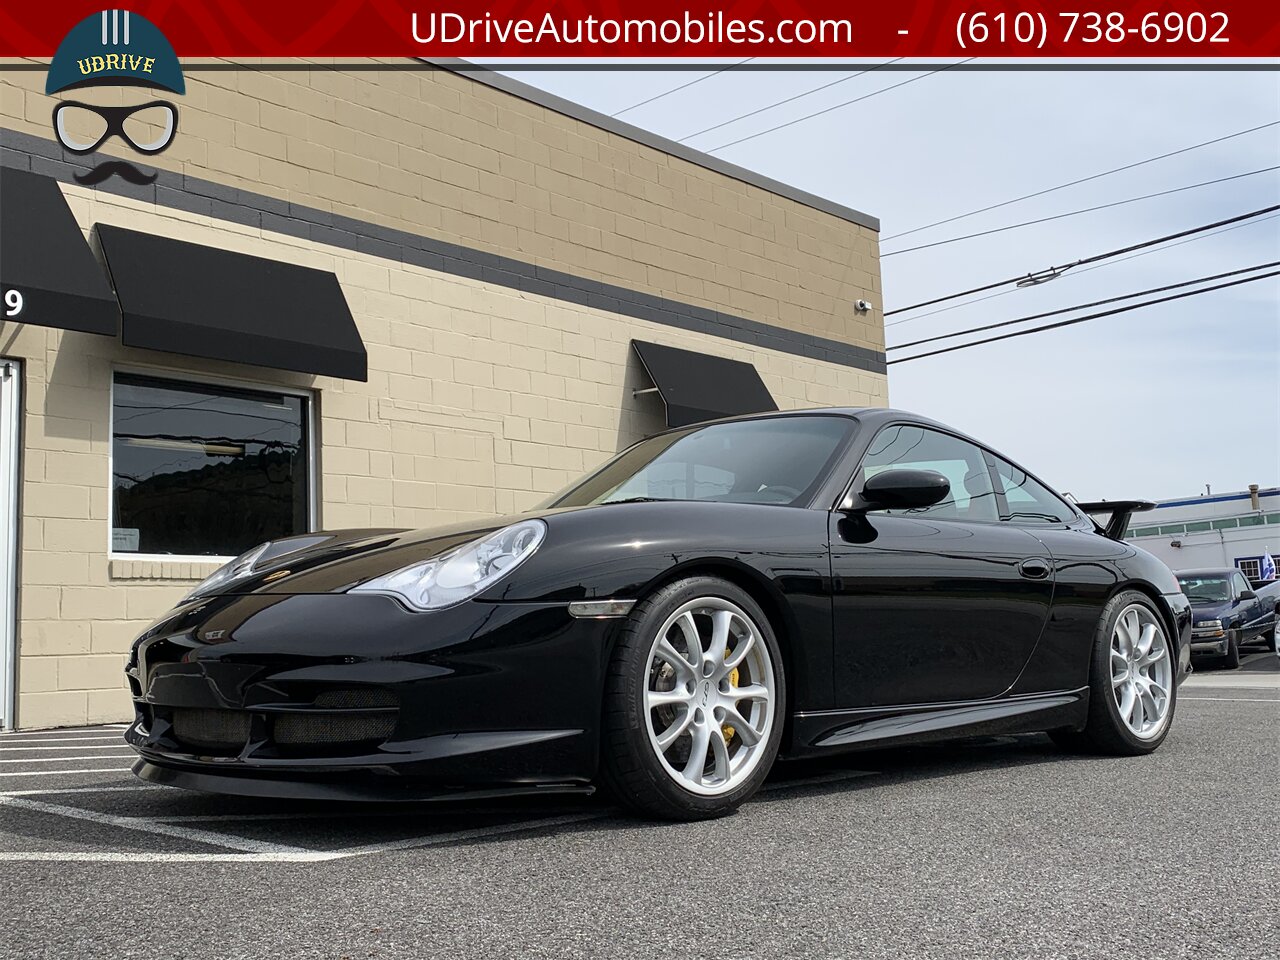 2004 Porsche 911 GT3 996 PCCB Sport Seats Red Stitching $118k MSRP   - Photo 3 - West Chester, PA 19382